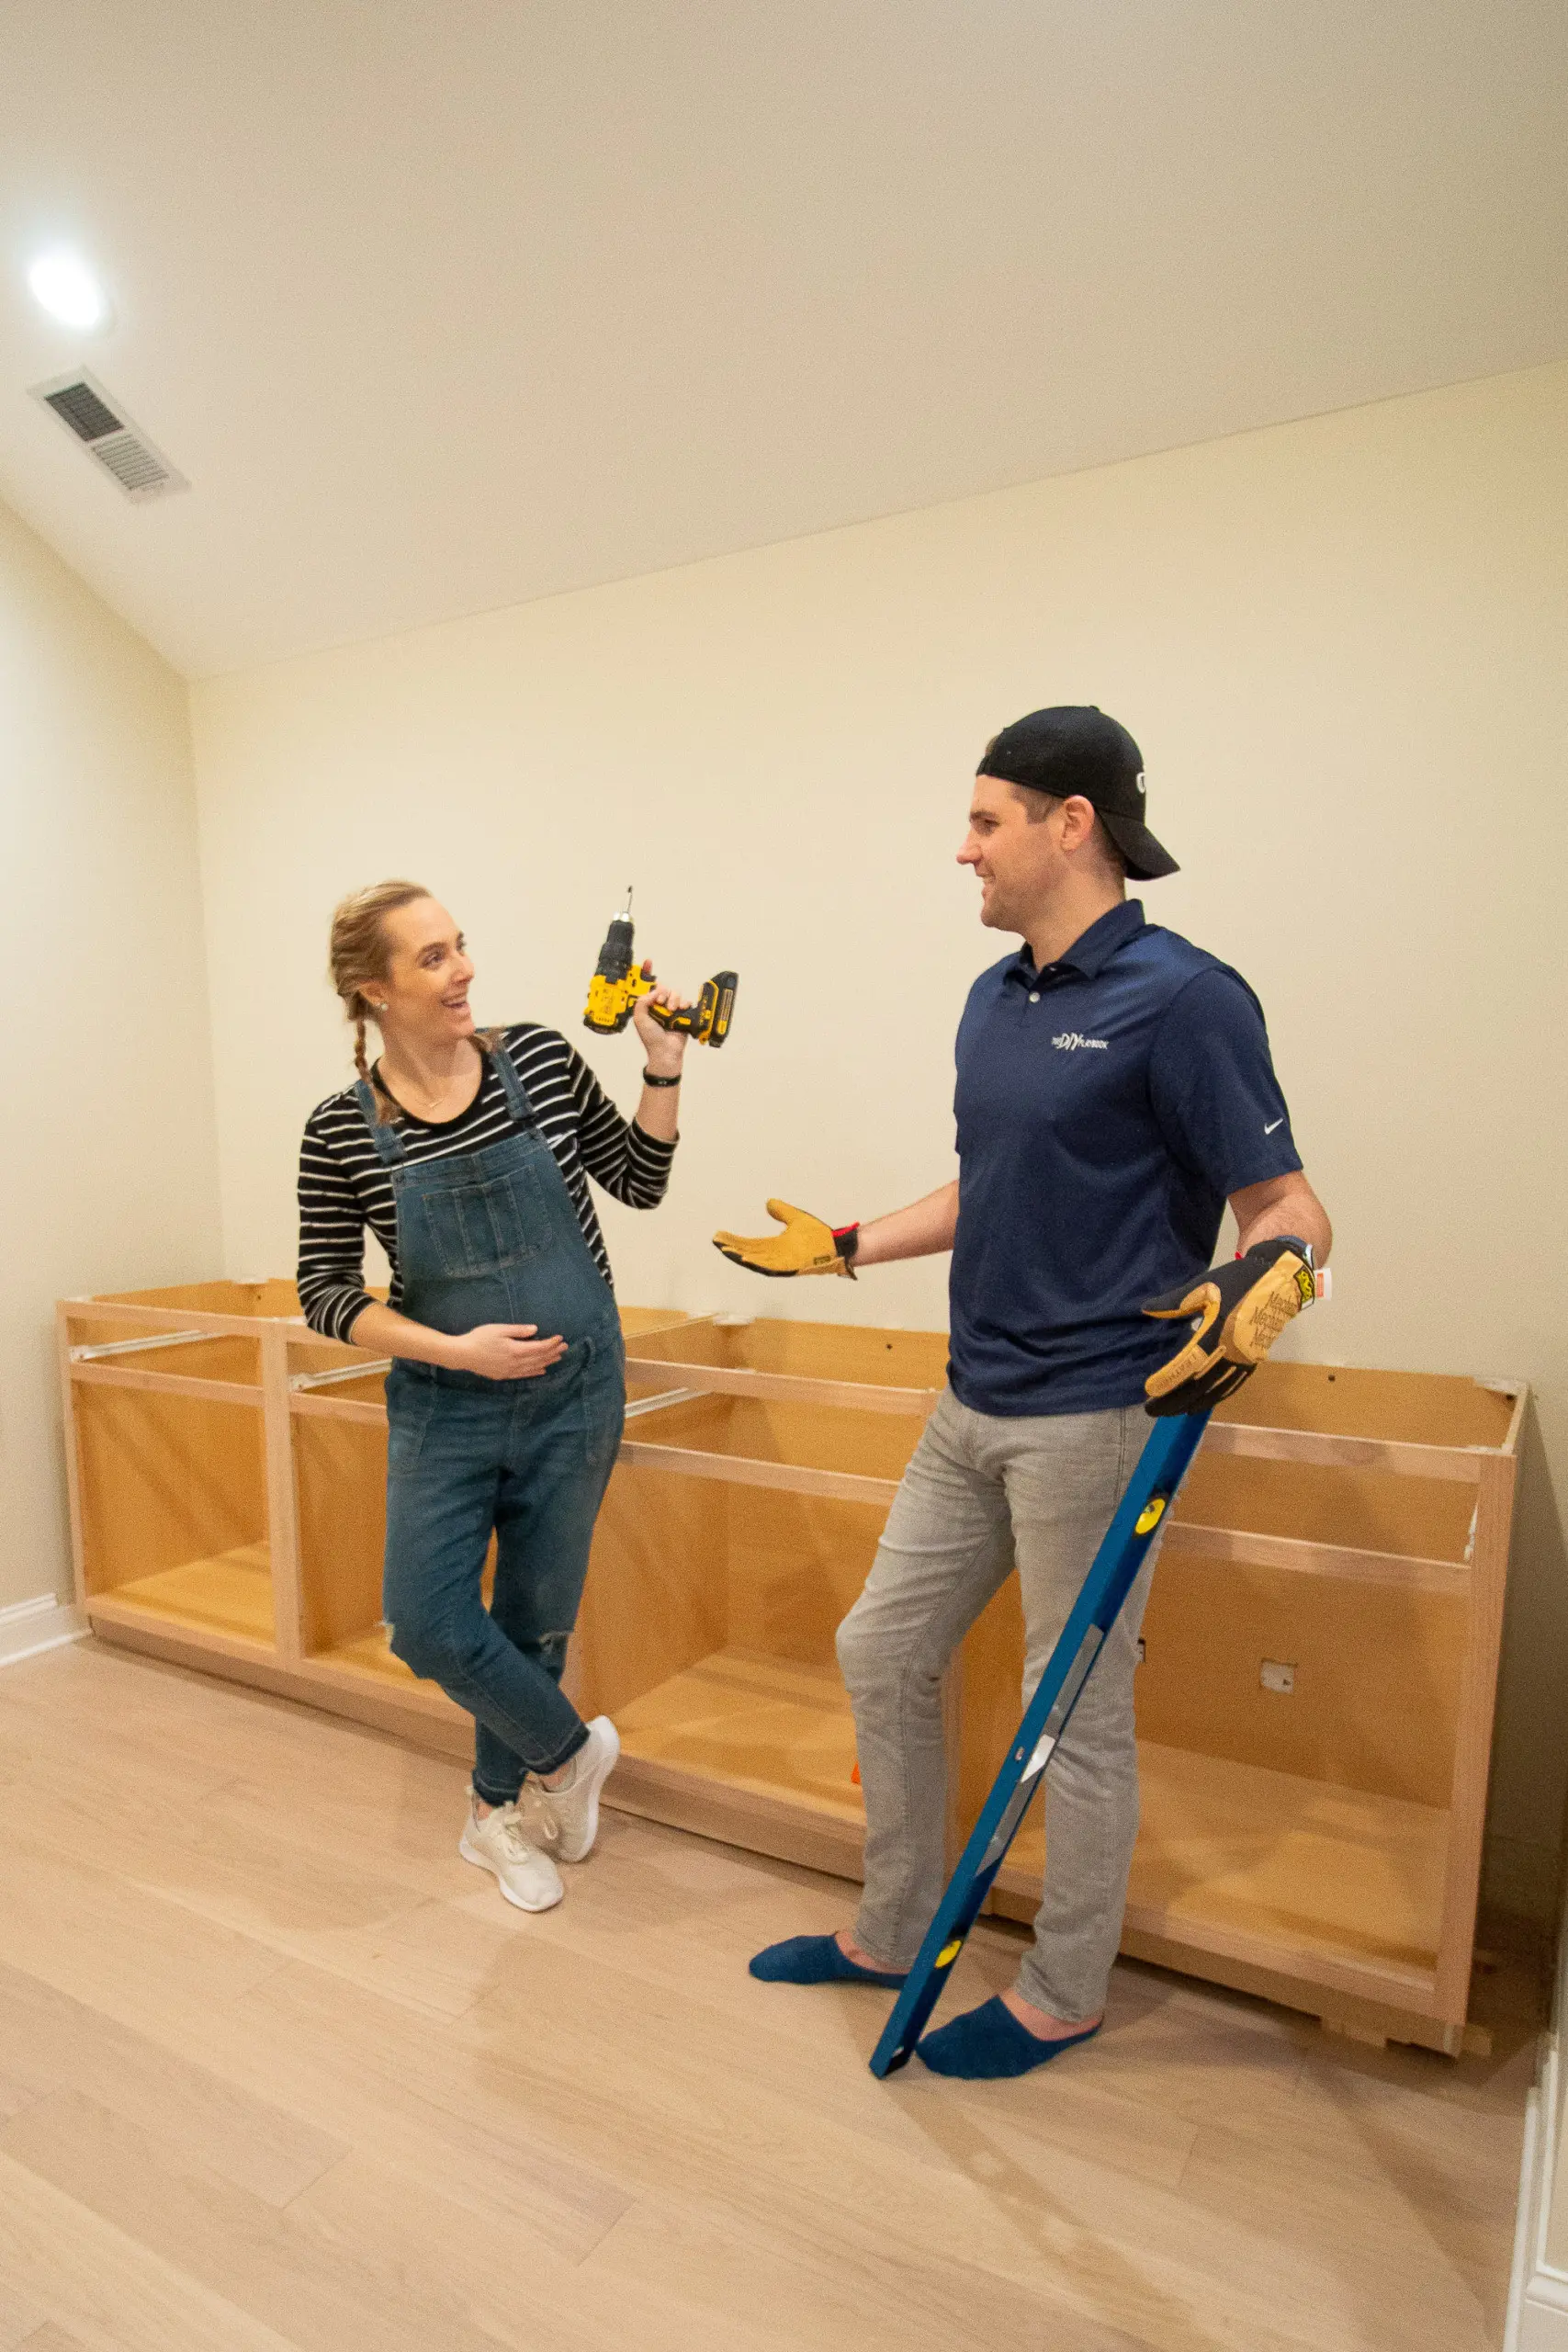 Using a power drill to make built-ins